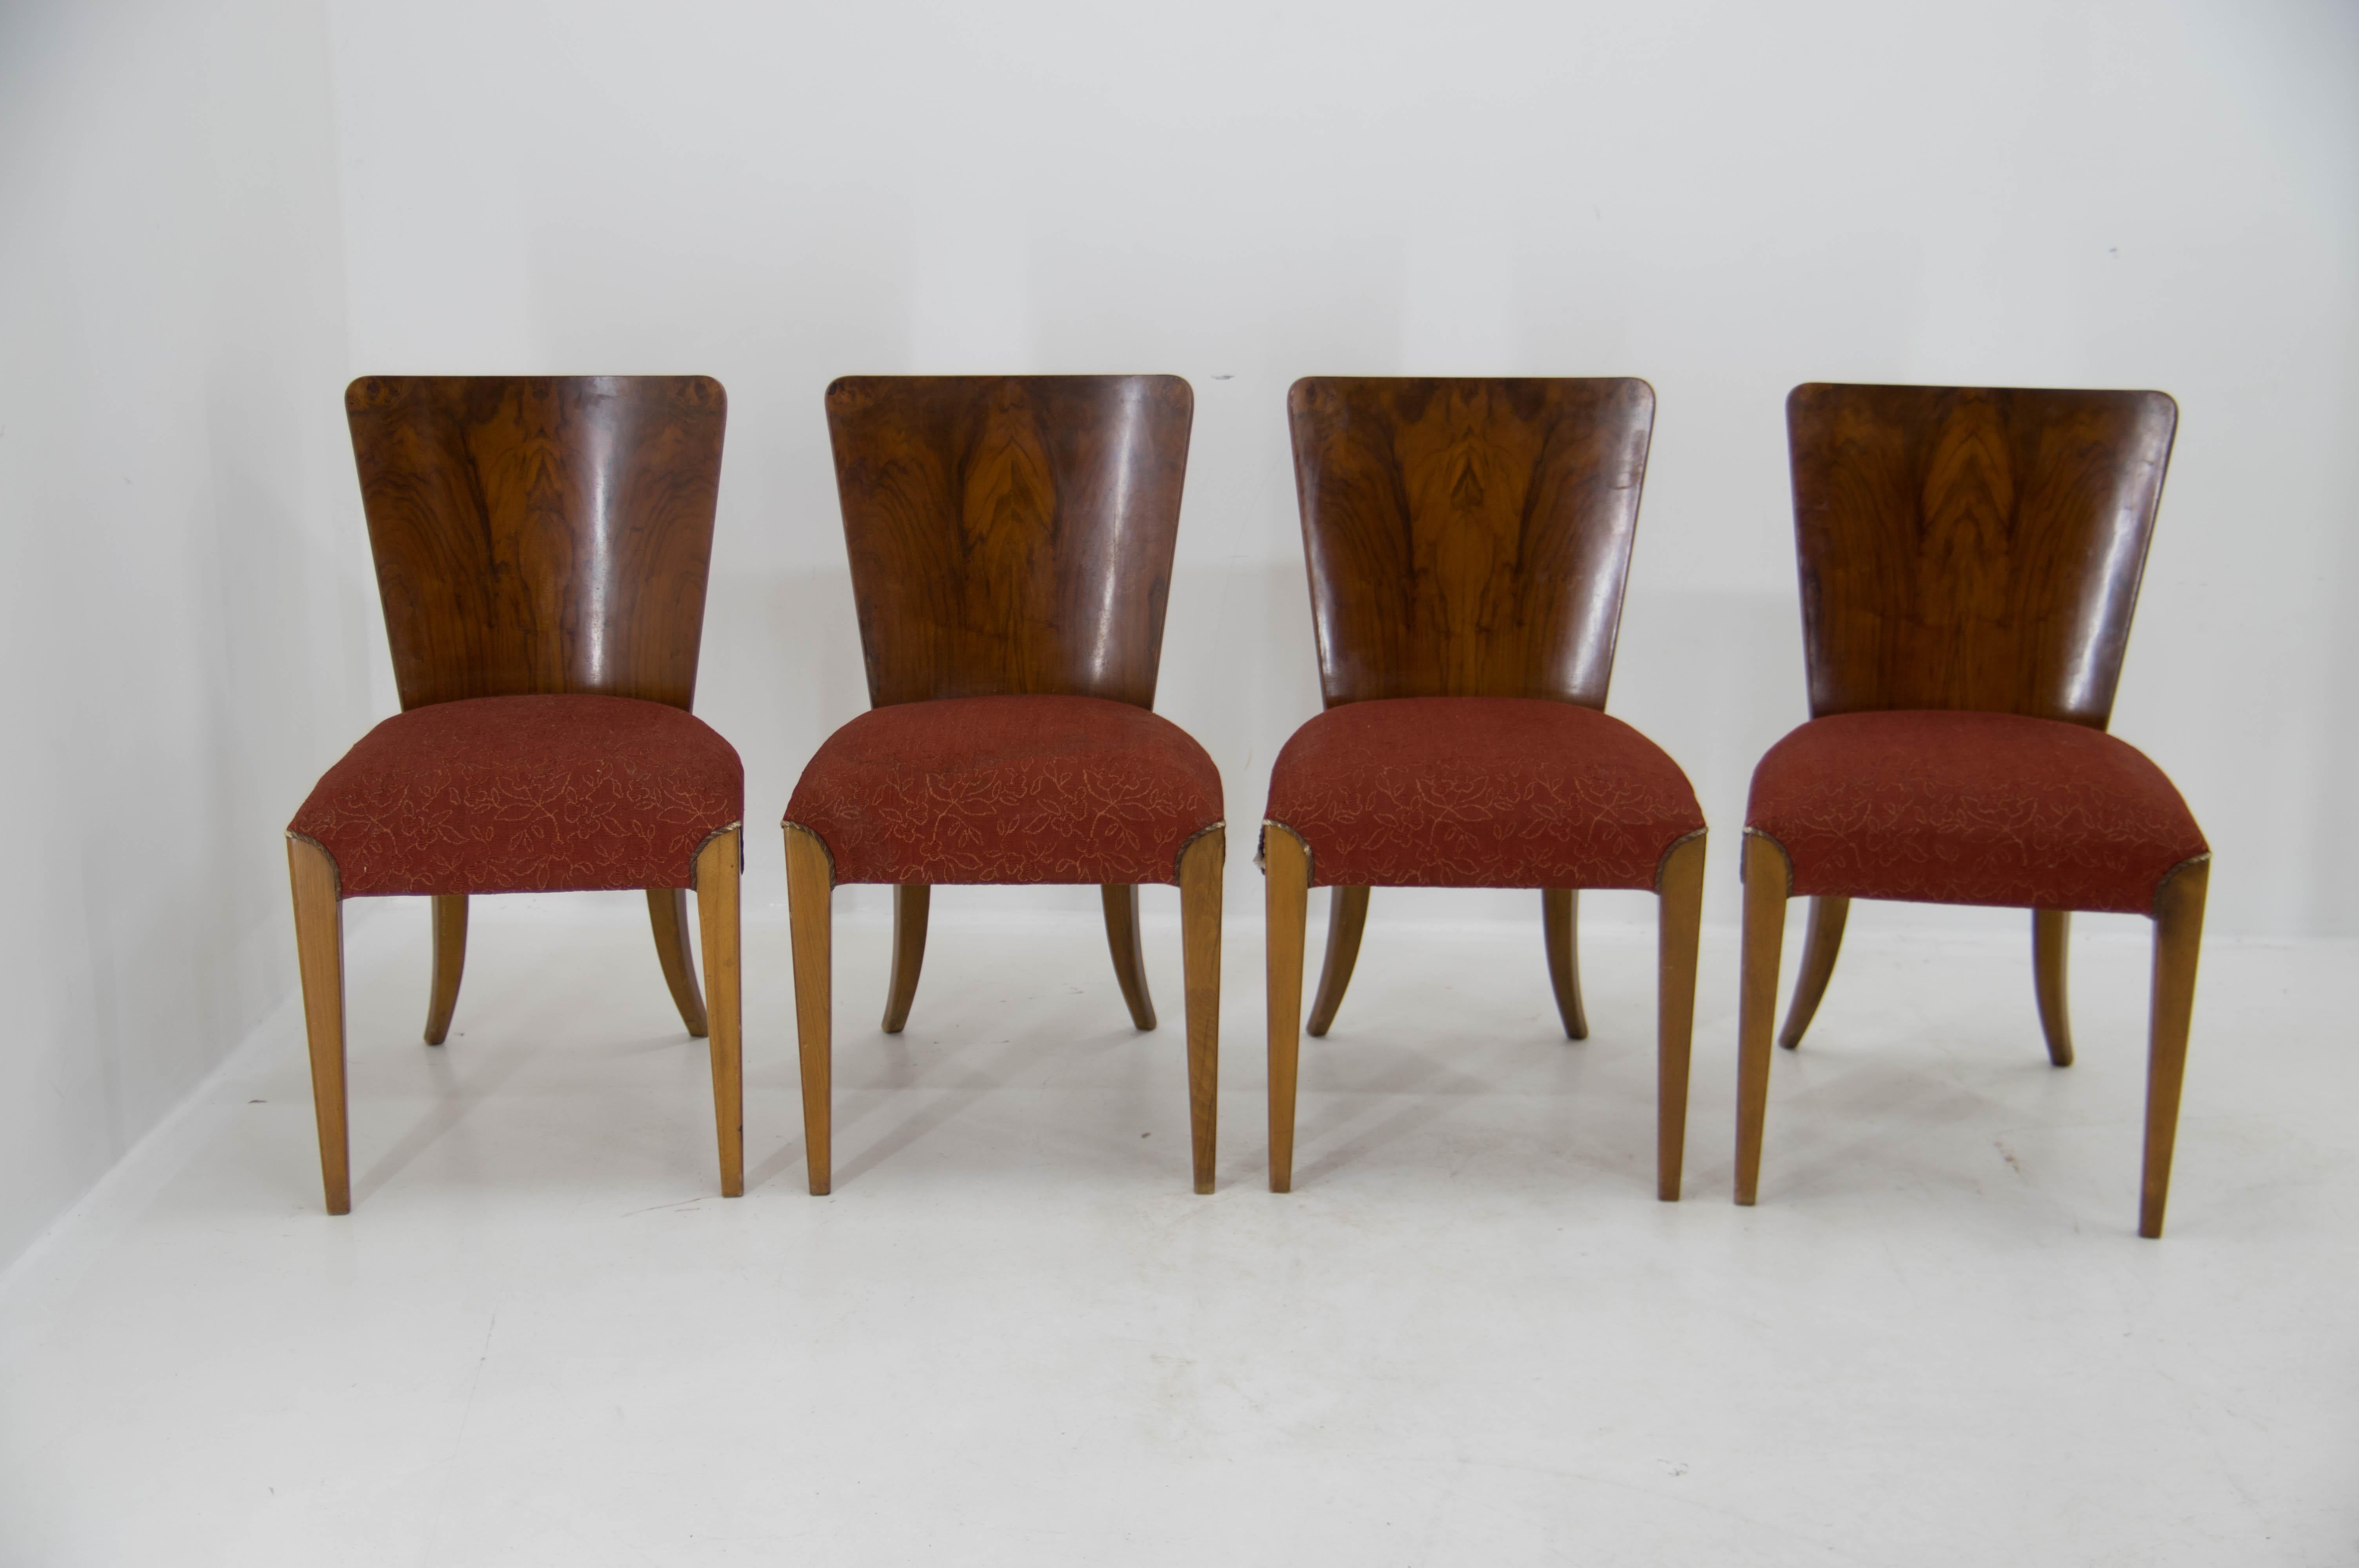 Set of four dining chairs, catalog number H-214, designed by Jindrich Halabala in the 1930s, manufactured in ÚP Závody in the 1950s. It features walnut veneer and original upholstery. The chairs are in good original condition. Upholstery has minor